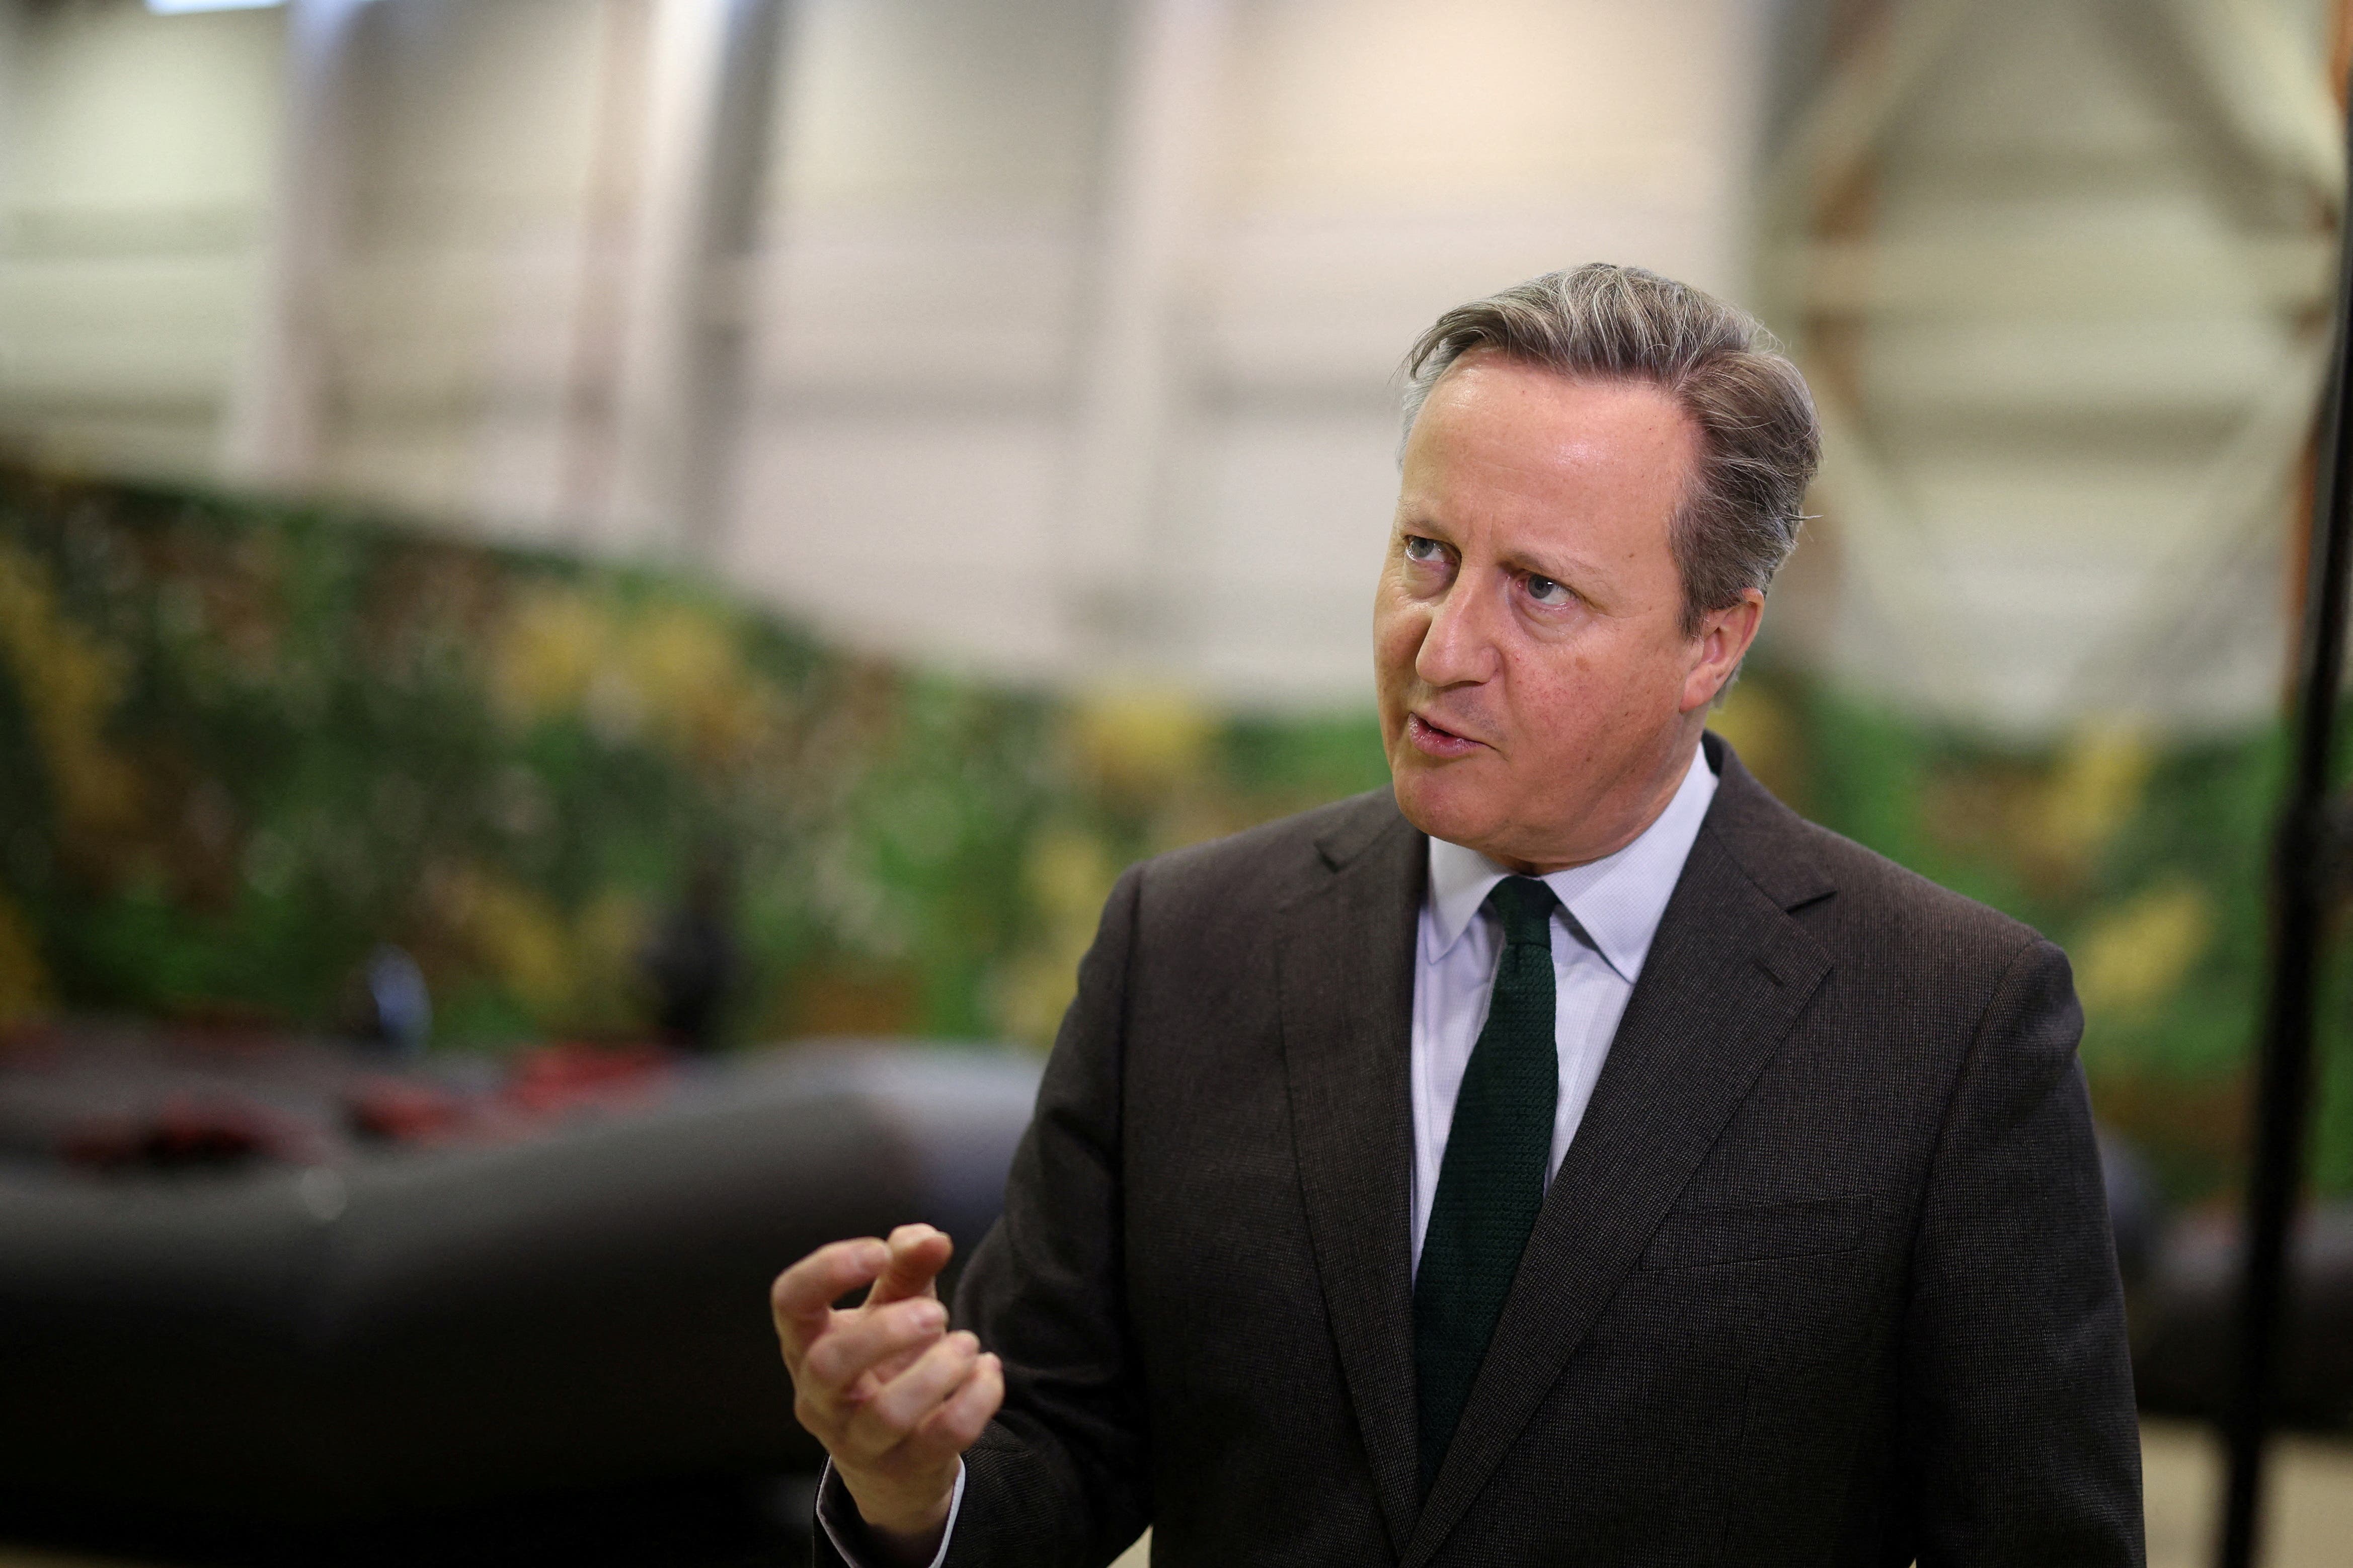 David Cameron was in No 10 when an internal investigation into the Horizon system was dropped